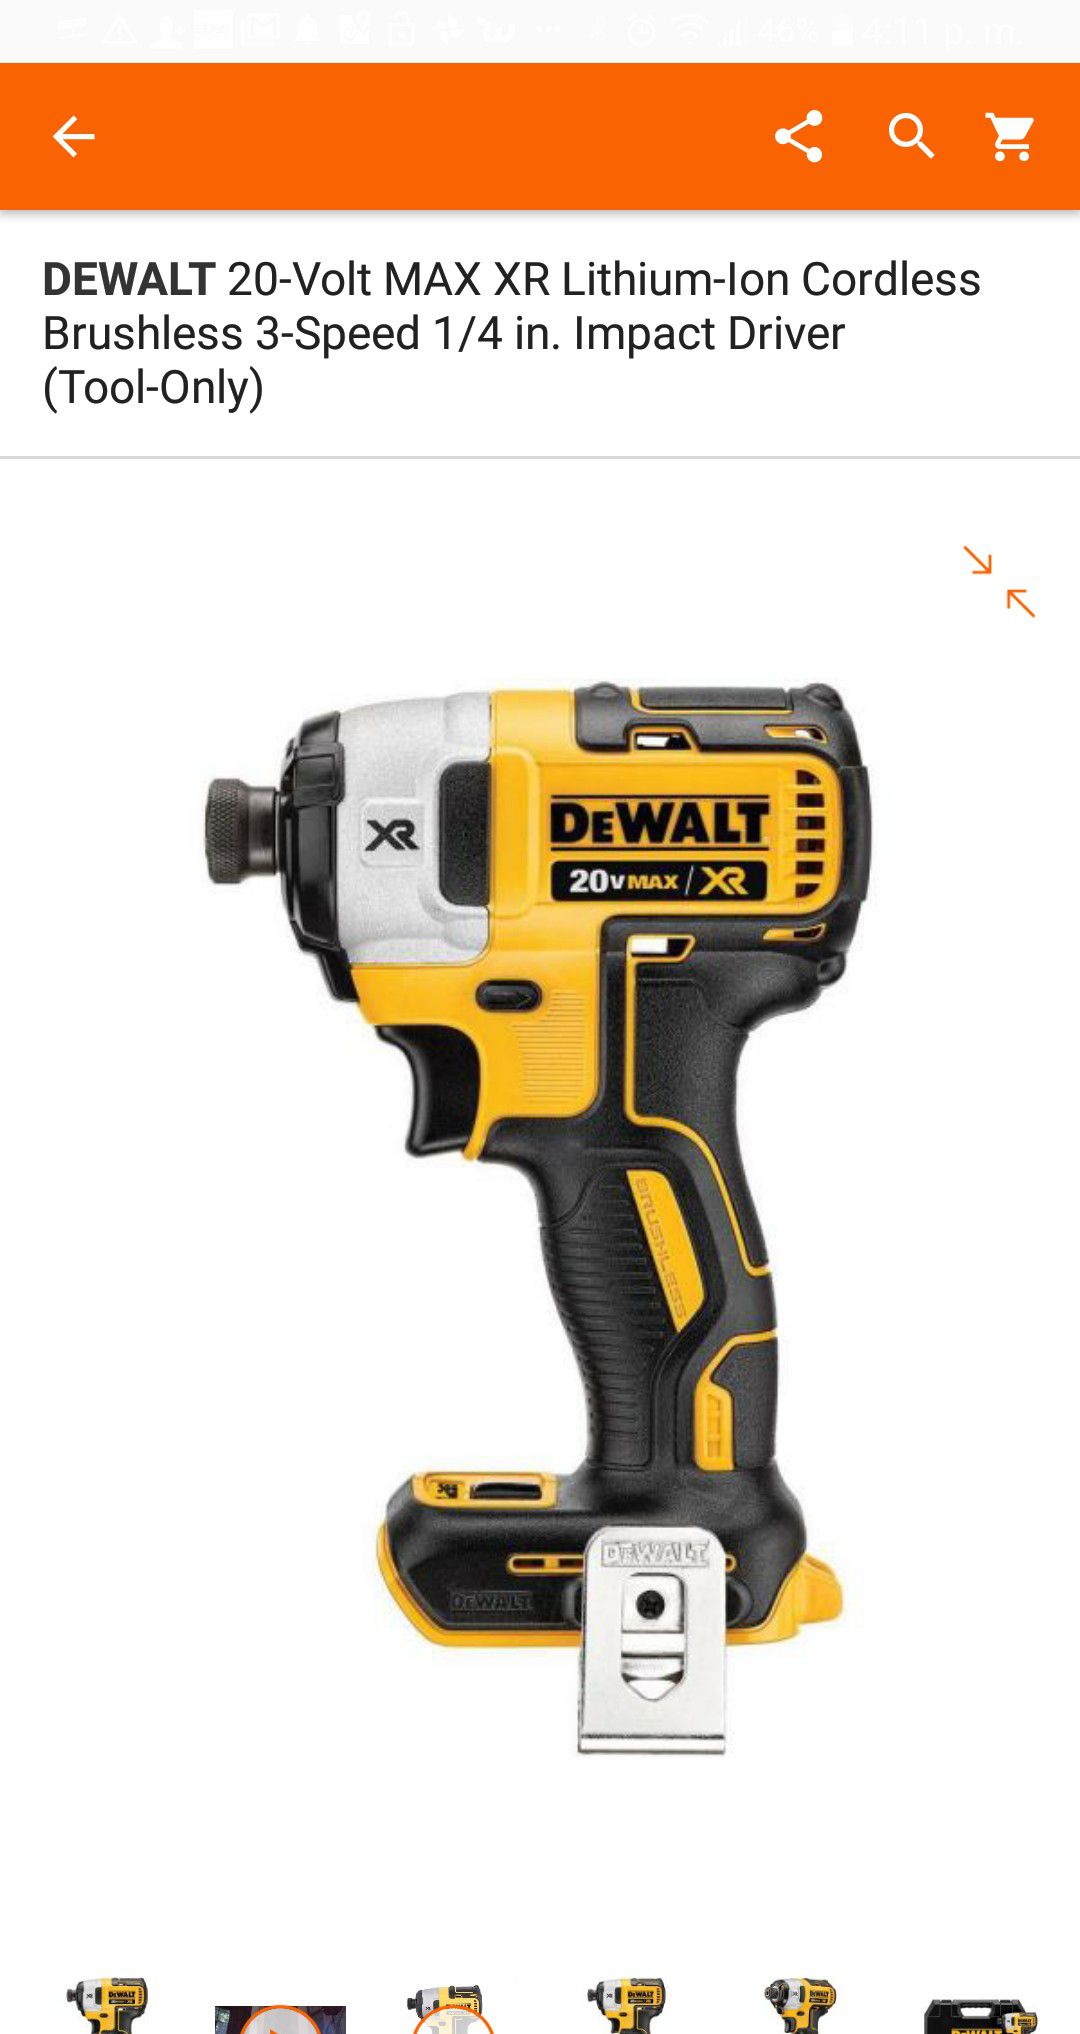 Drill de impacto XR 3 velocidades ((( TOOL ONLY)))